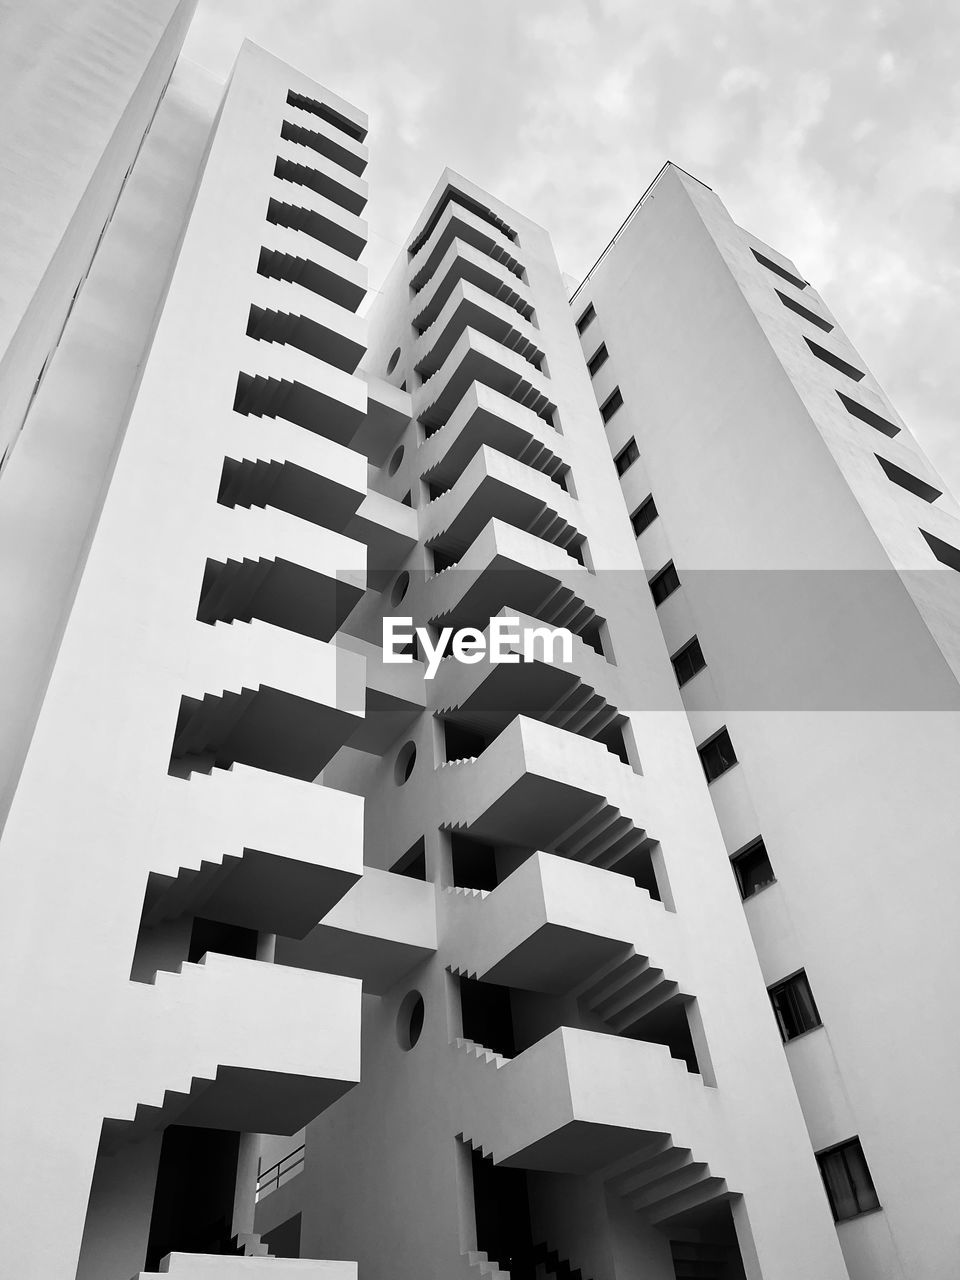 architecture, building exterior, built structure, tower block, skyscraper, building, city, black and white, sky, low angle view, monochrome, office building exterior, monochrome photography, no people, apartment, line, white, nature, office, residential district, facade, window, brutalist architecture, outdoors, business, day, pattern, tower